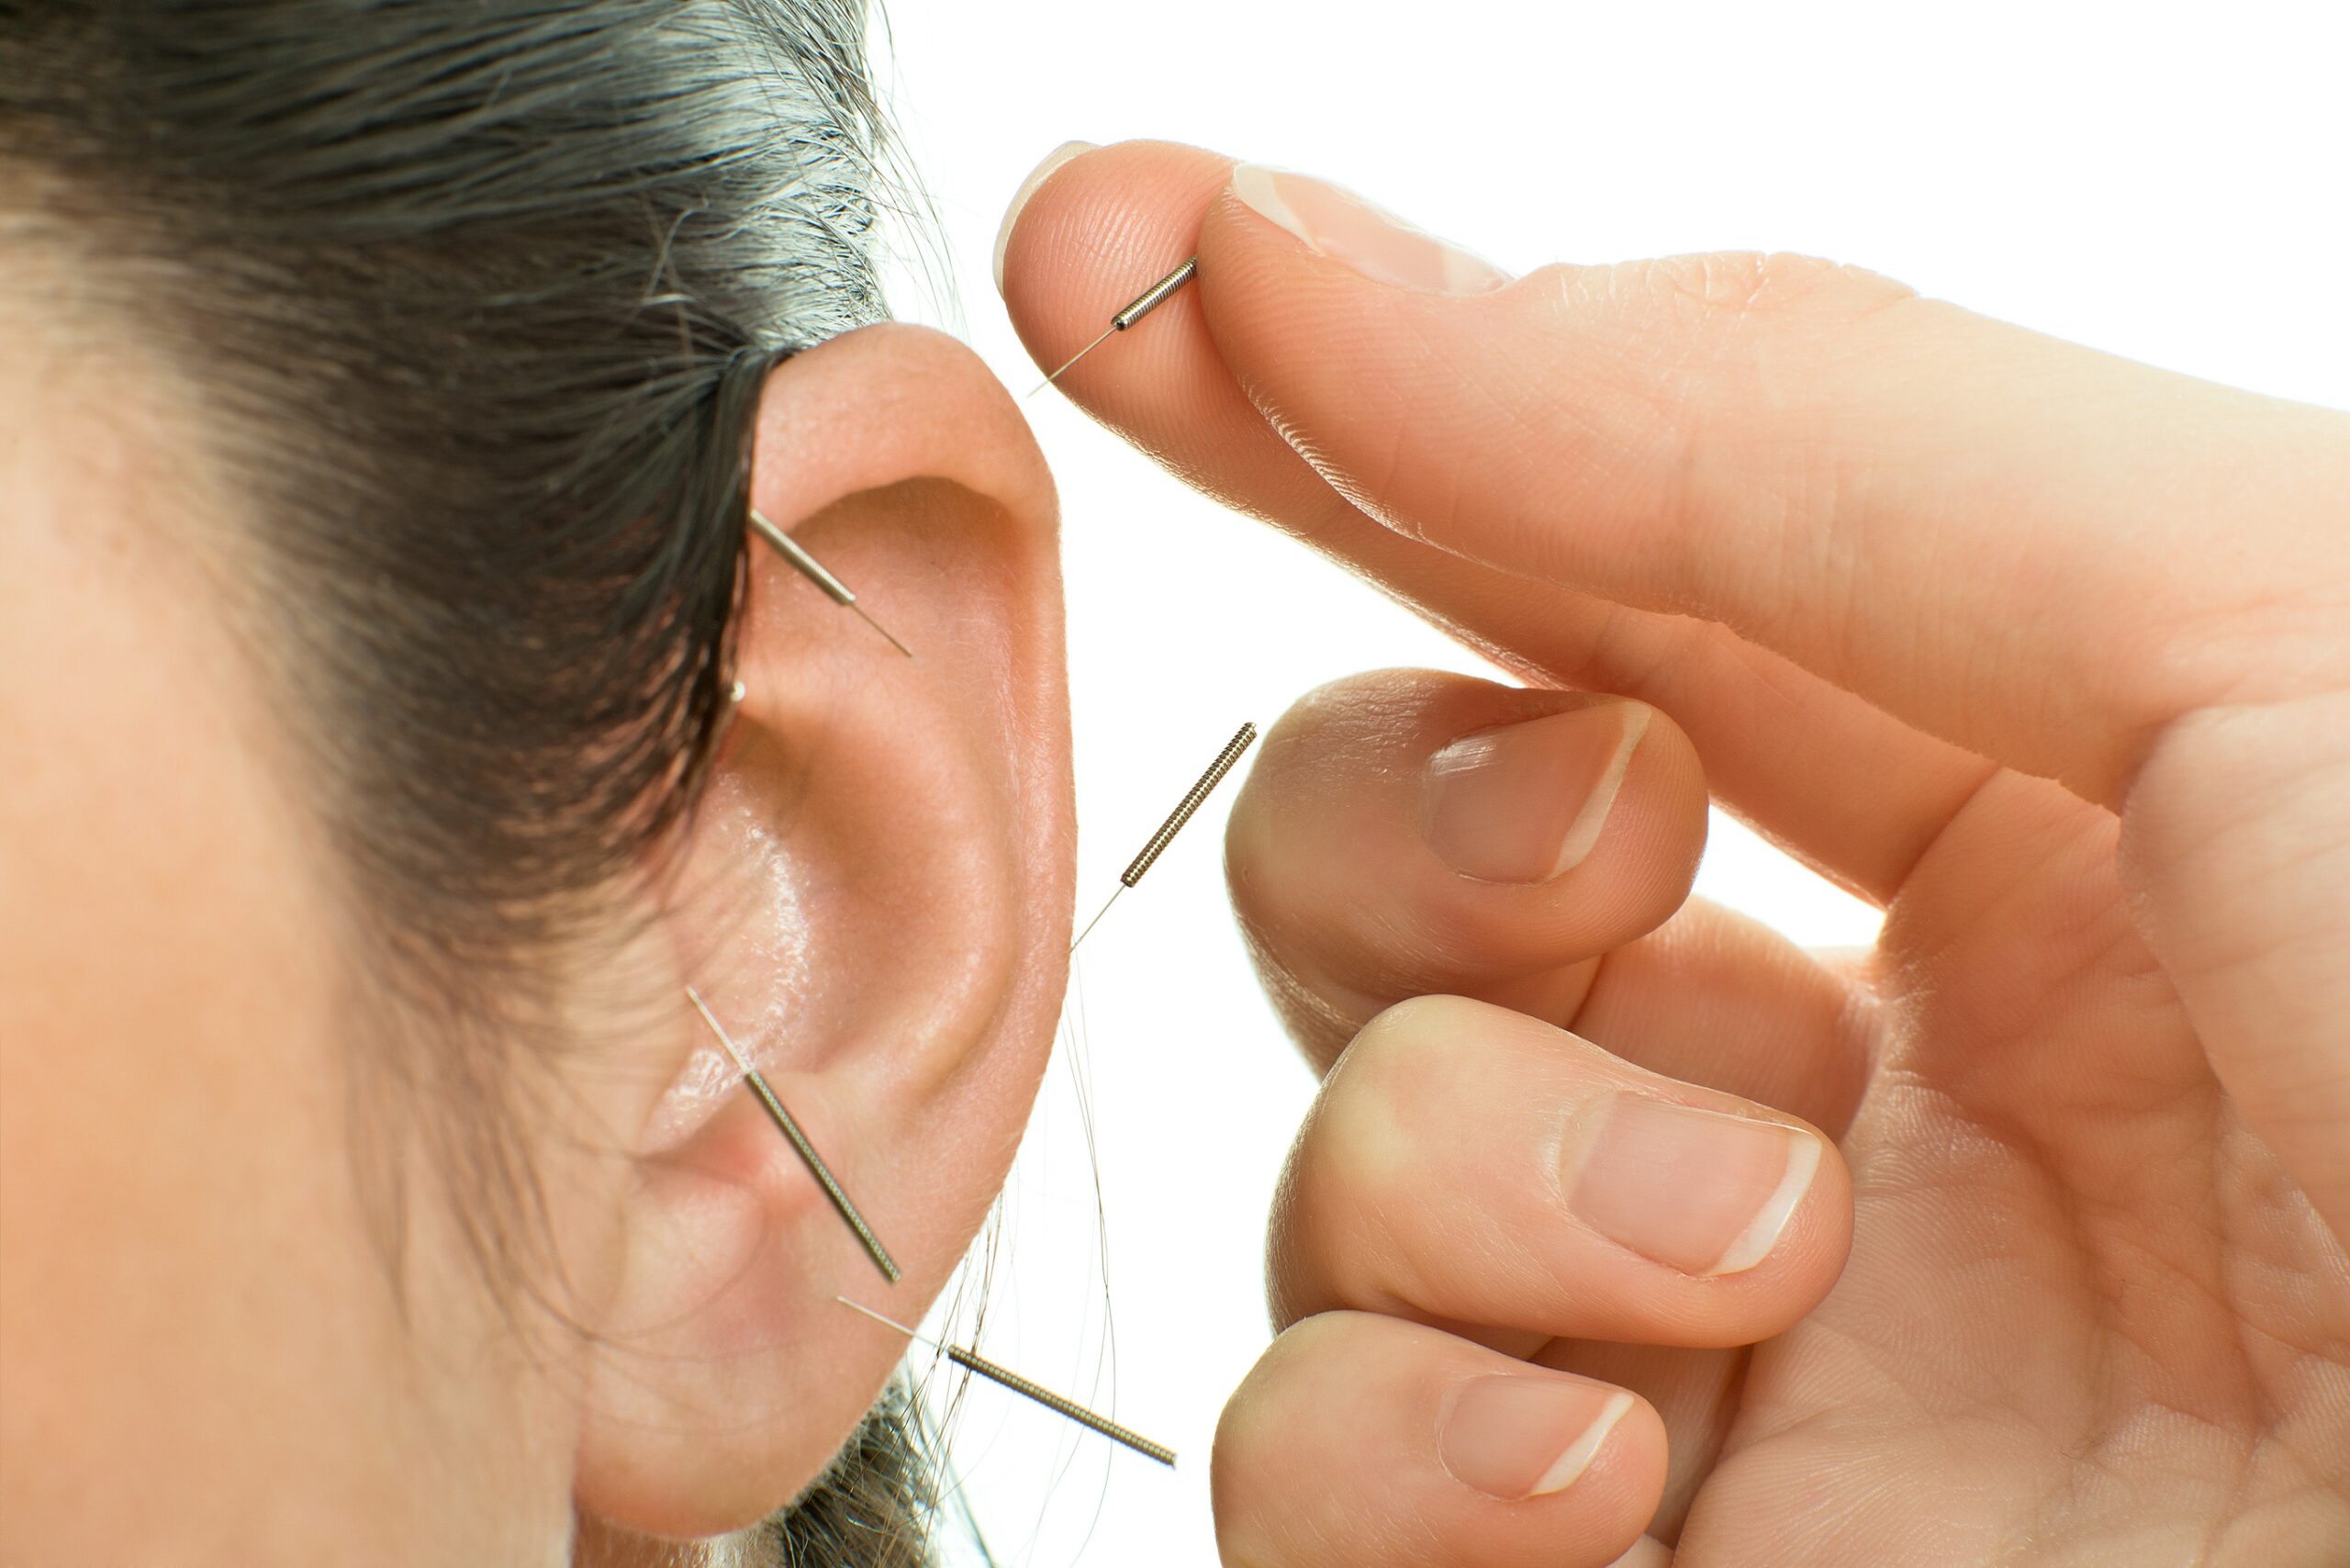 Ear acupuncture reduces depression as effectively as antidepressants